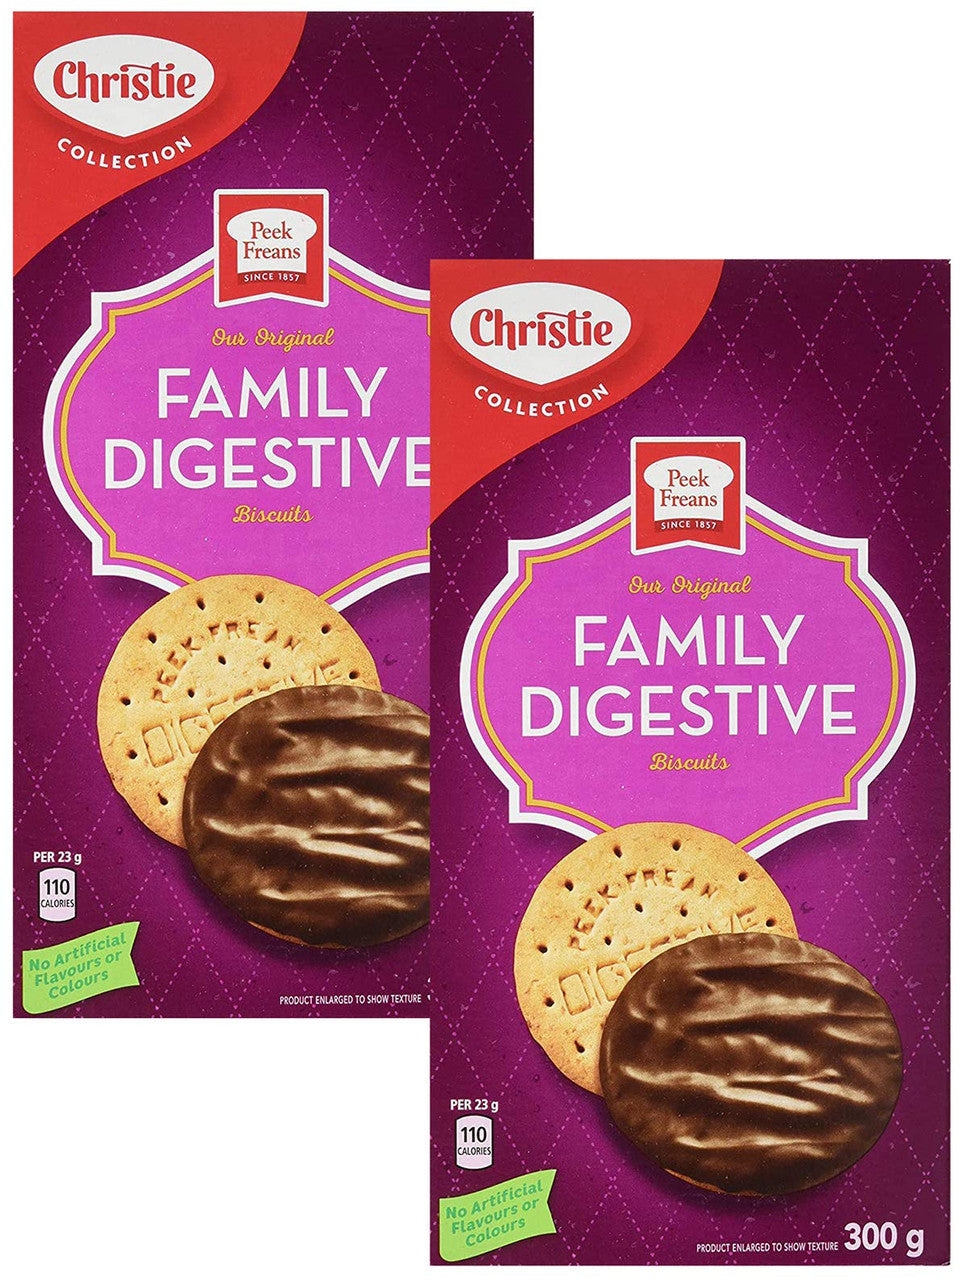 Christie Peek Frean Family Digestive cookies, 300g/10.6 oz, (Pack of 2) {Imported from Canada}